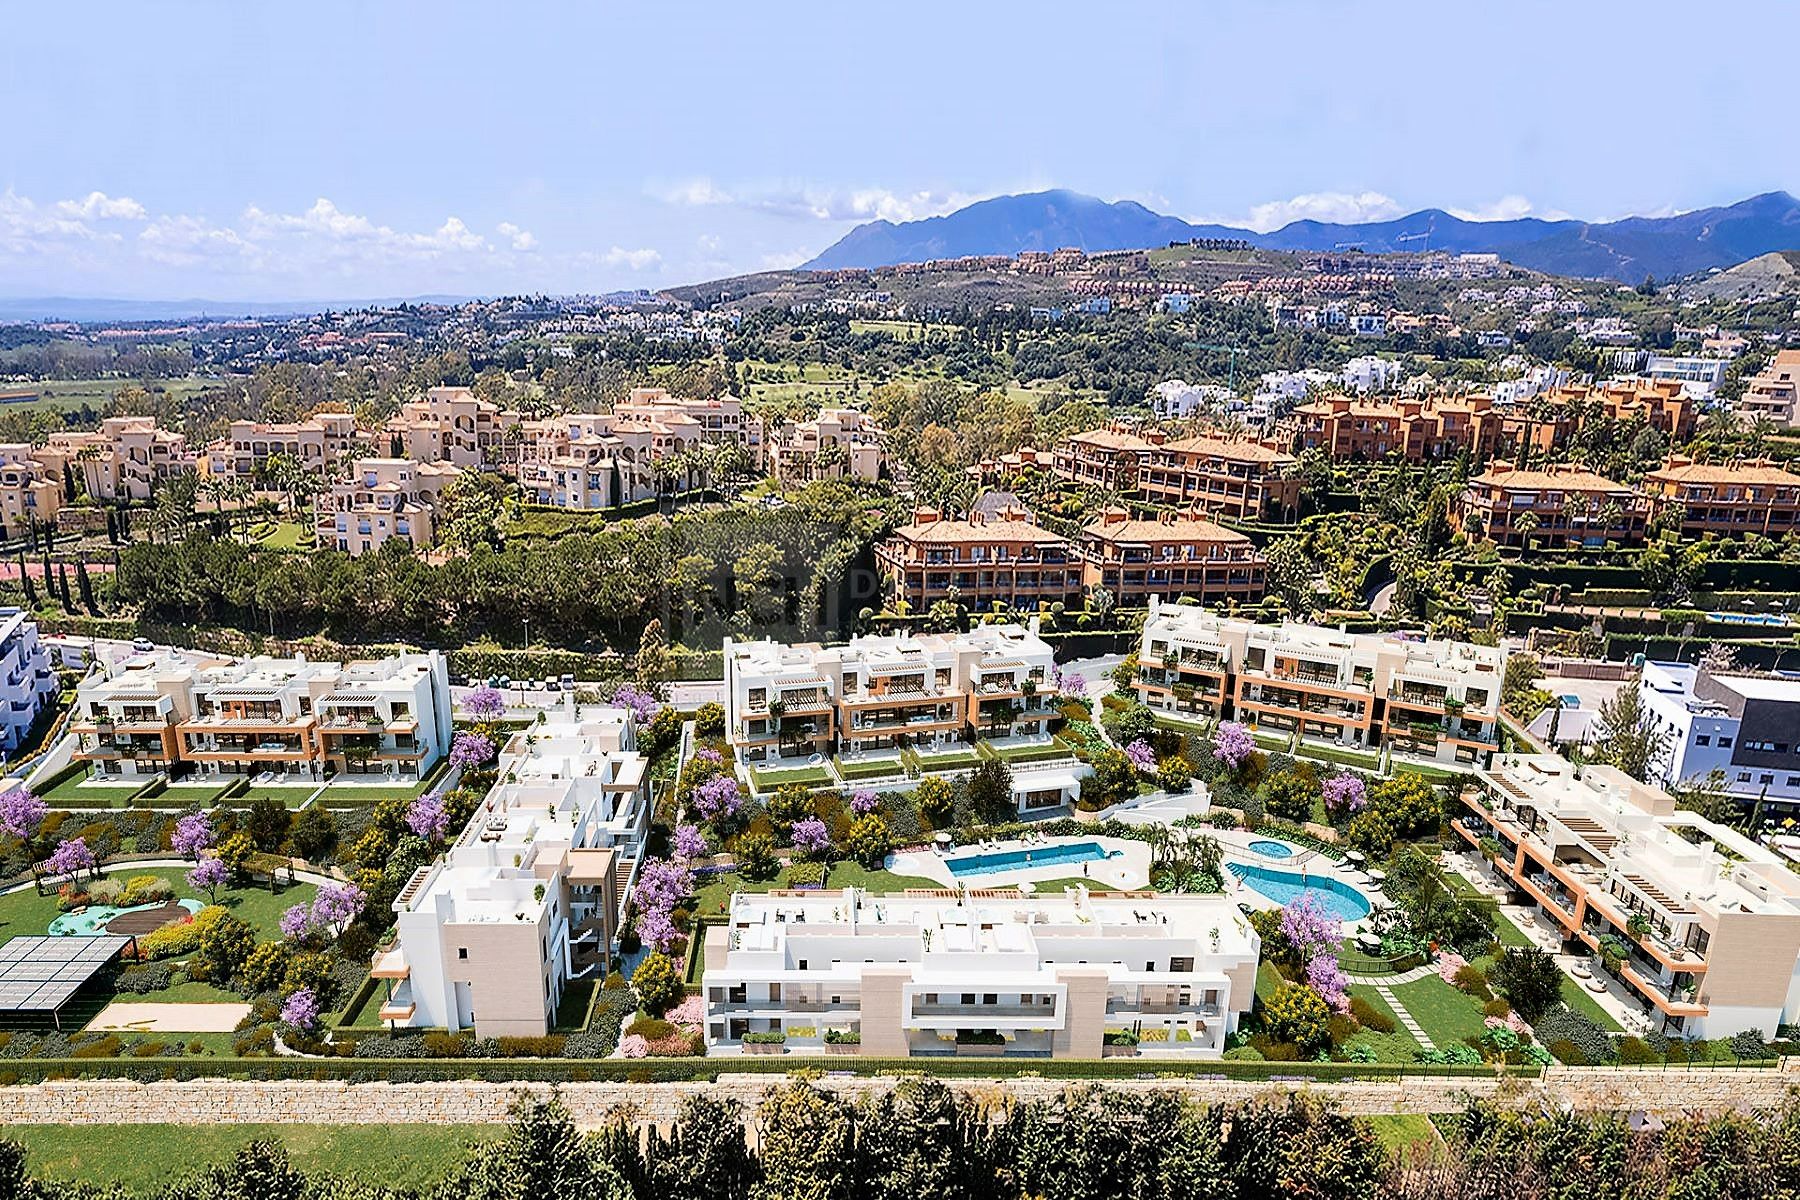 AMAZING VLAUE 3 BEDROOM PENTHOUSE LOCATED IN ATALAYA, NEW GOLDEN MILE